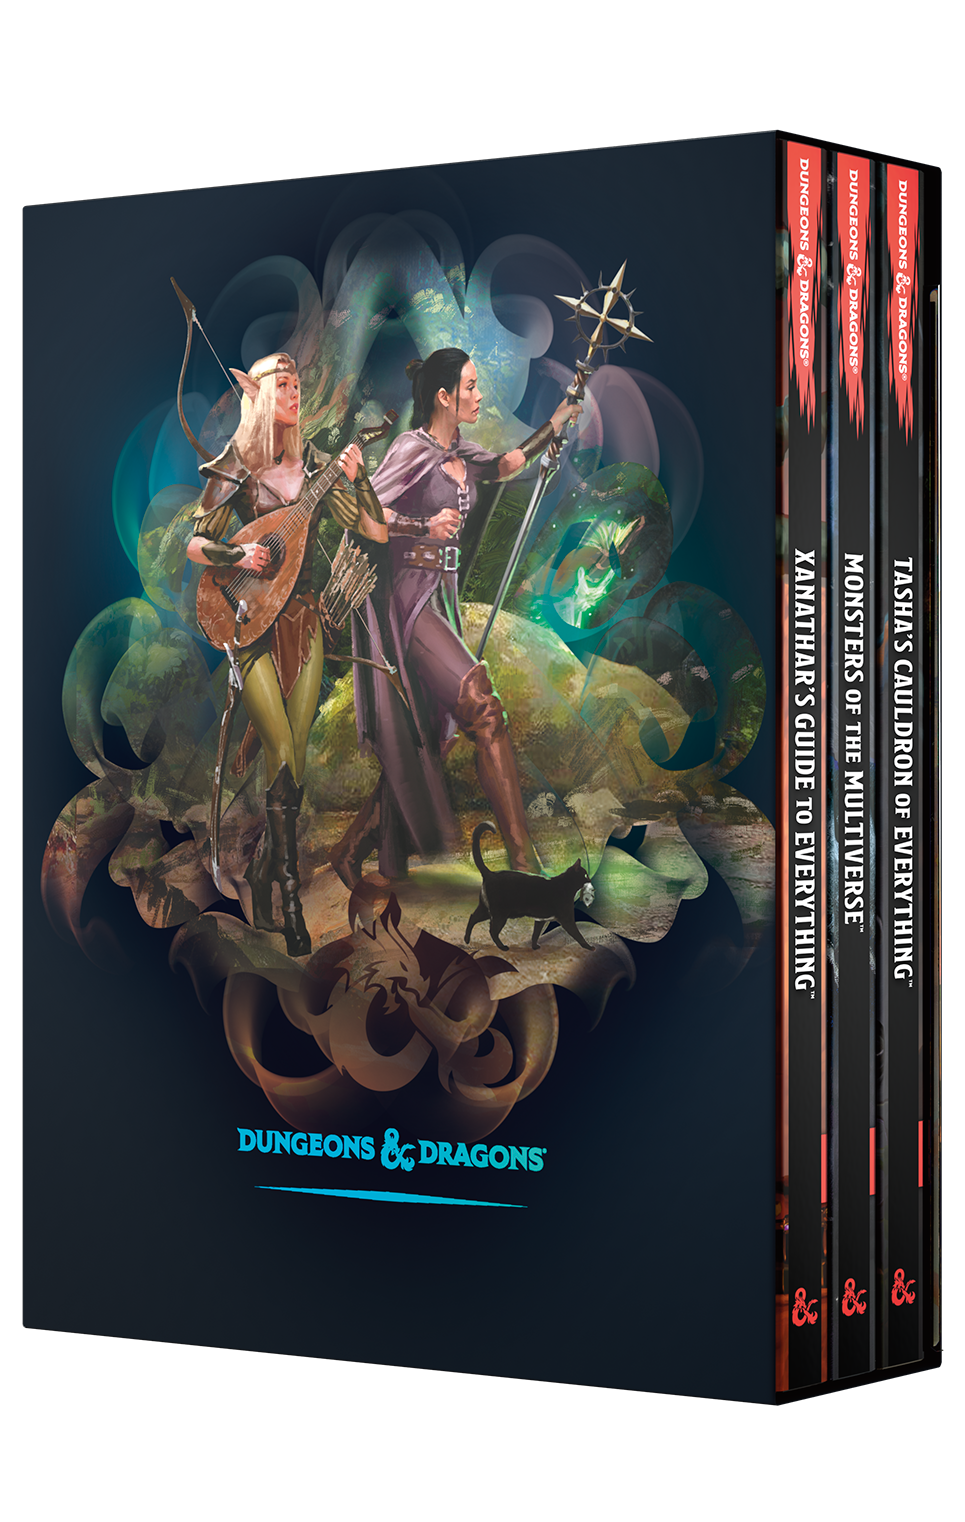 DnD Rules Expansion Gift Set (T.O.S.) -  Wizards of the Coast